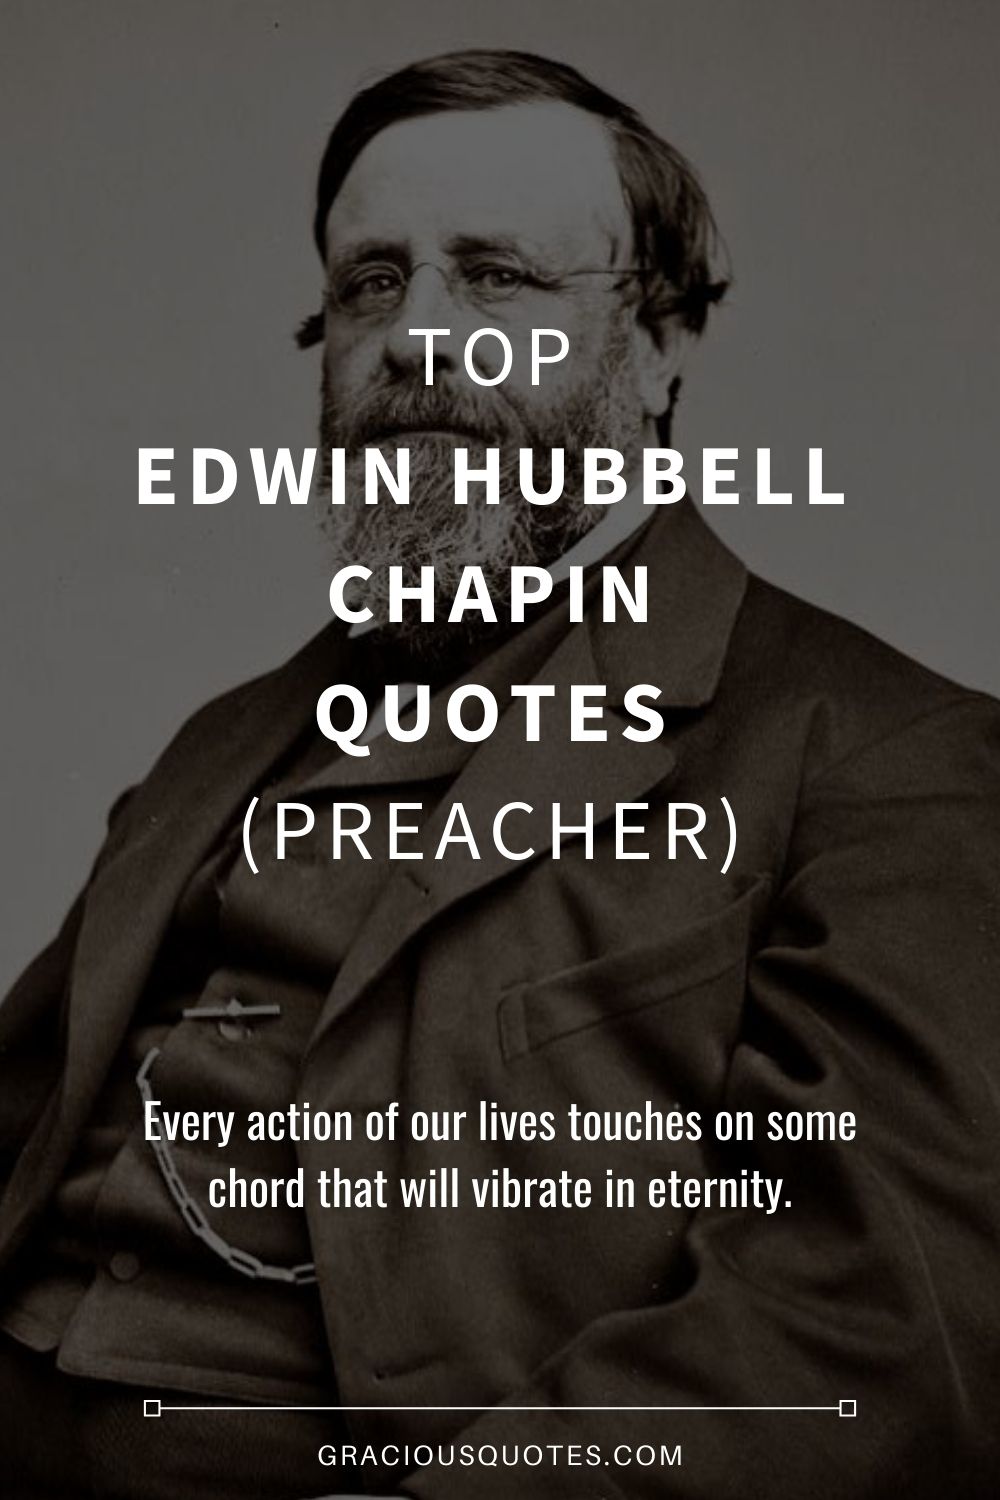 Top Edwin Hubbell Chapin Quotes (PREACHER) - Gracious Quotes